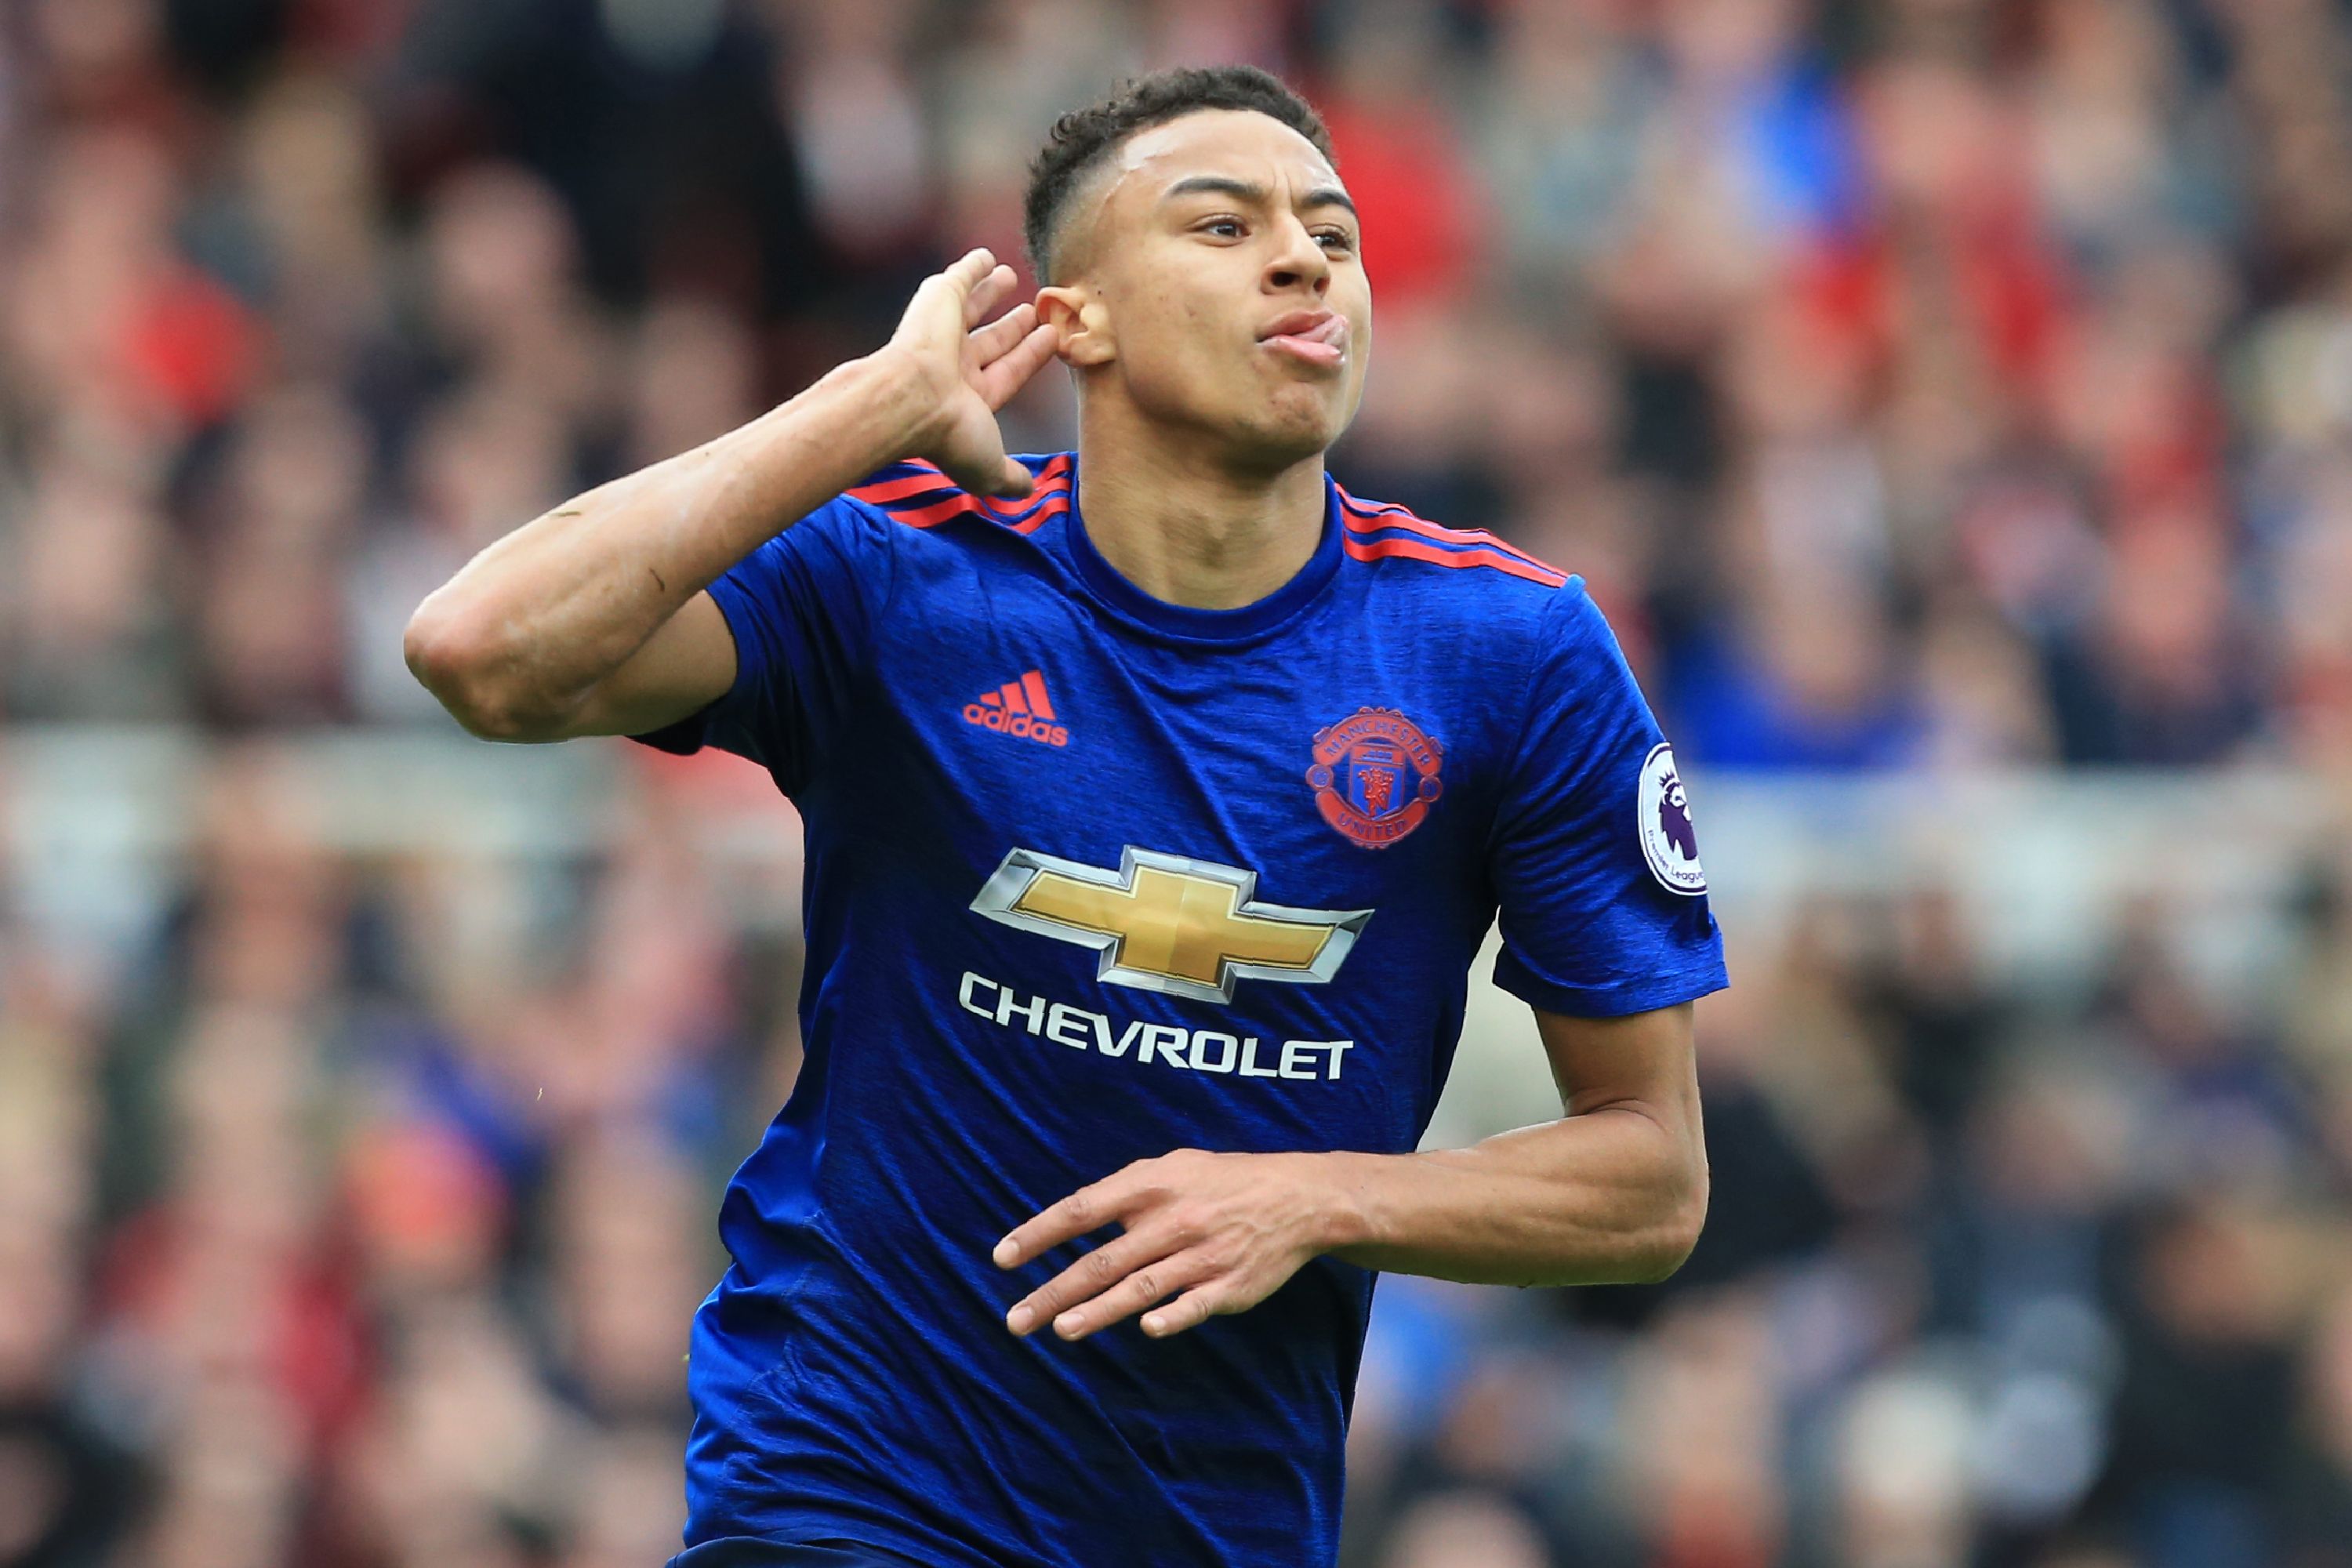 Manchester United's English midfielder Jesse Lingard celebrates after scoring their second goal during the English Premier League football match between Middlesbrough and Manchester United at Riverside Stadium in Middlesbrough, north east England on March 19, 2017. / AFP PHOTO / Lindsey PARNABY / RESTRICTED TO EDITORIAL USE. No use with unauthorized audio, video, data, fixture lists, club/league logos or 'live' services. Online in-match use limited to 75 images, no video emulation. No use in betting, games or single club/league/player publications.  /         (Photo credit should read LINDSEY PARNABY/AFP/Getty Images)